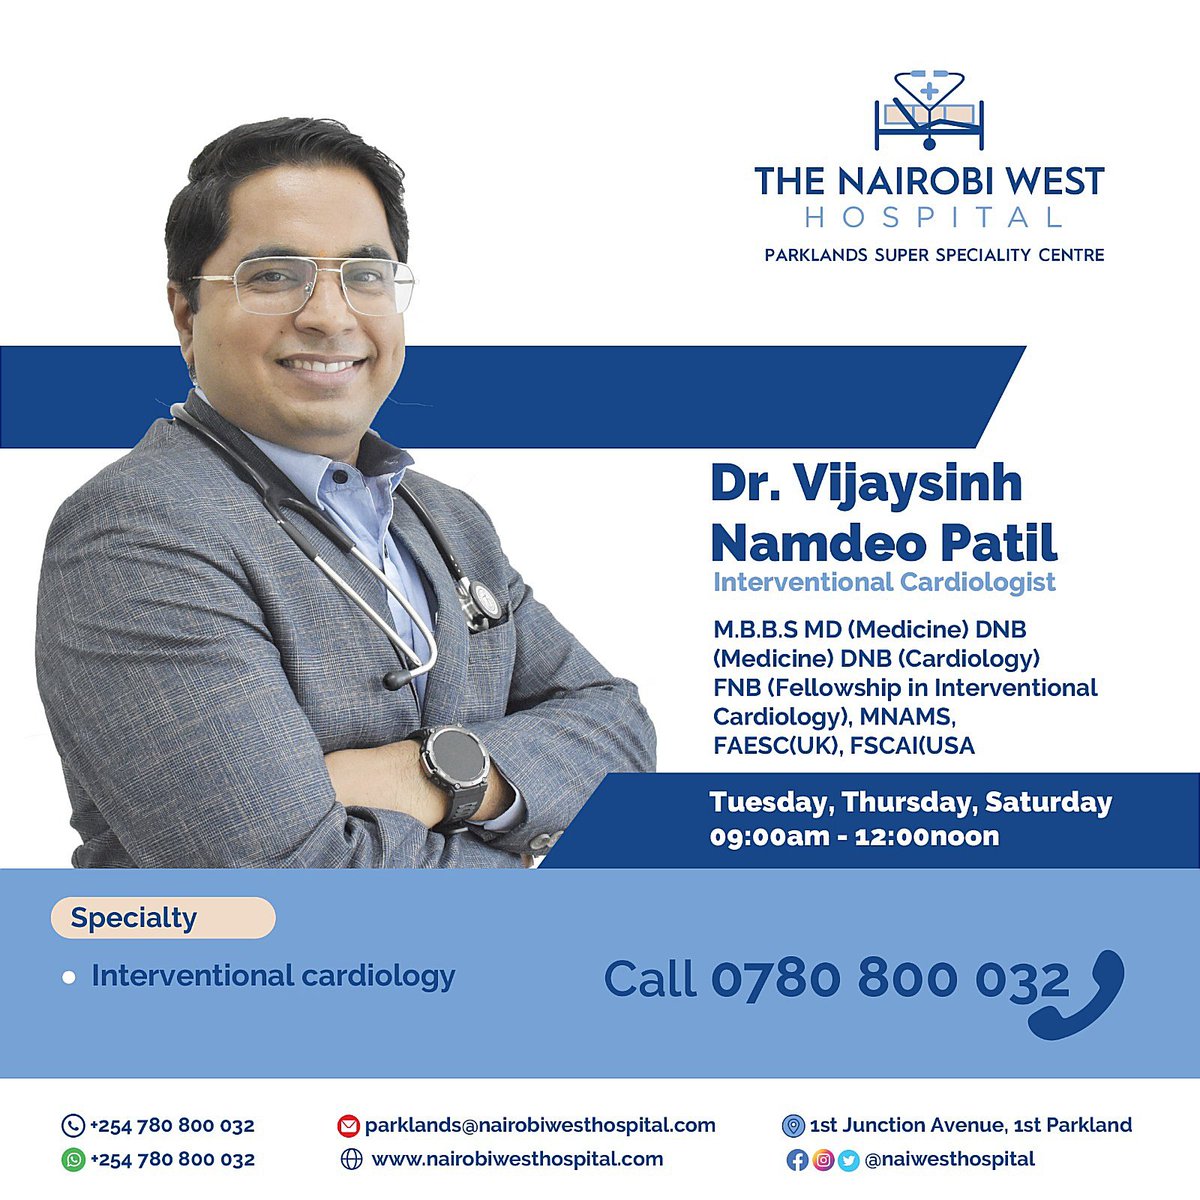 Dr. Vijaysinh Patil serves as the Director of the Cath Lab and Interventional Cardiology at The Nairobi West Hospital. A highly skilled paediatric and adult cardiac interventionist, To schedule an appointment with Dr. Patil for cardiac care, please contact 0780800032.